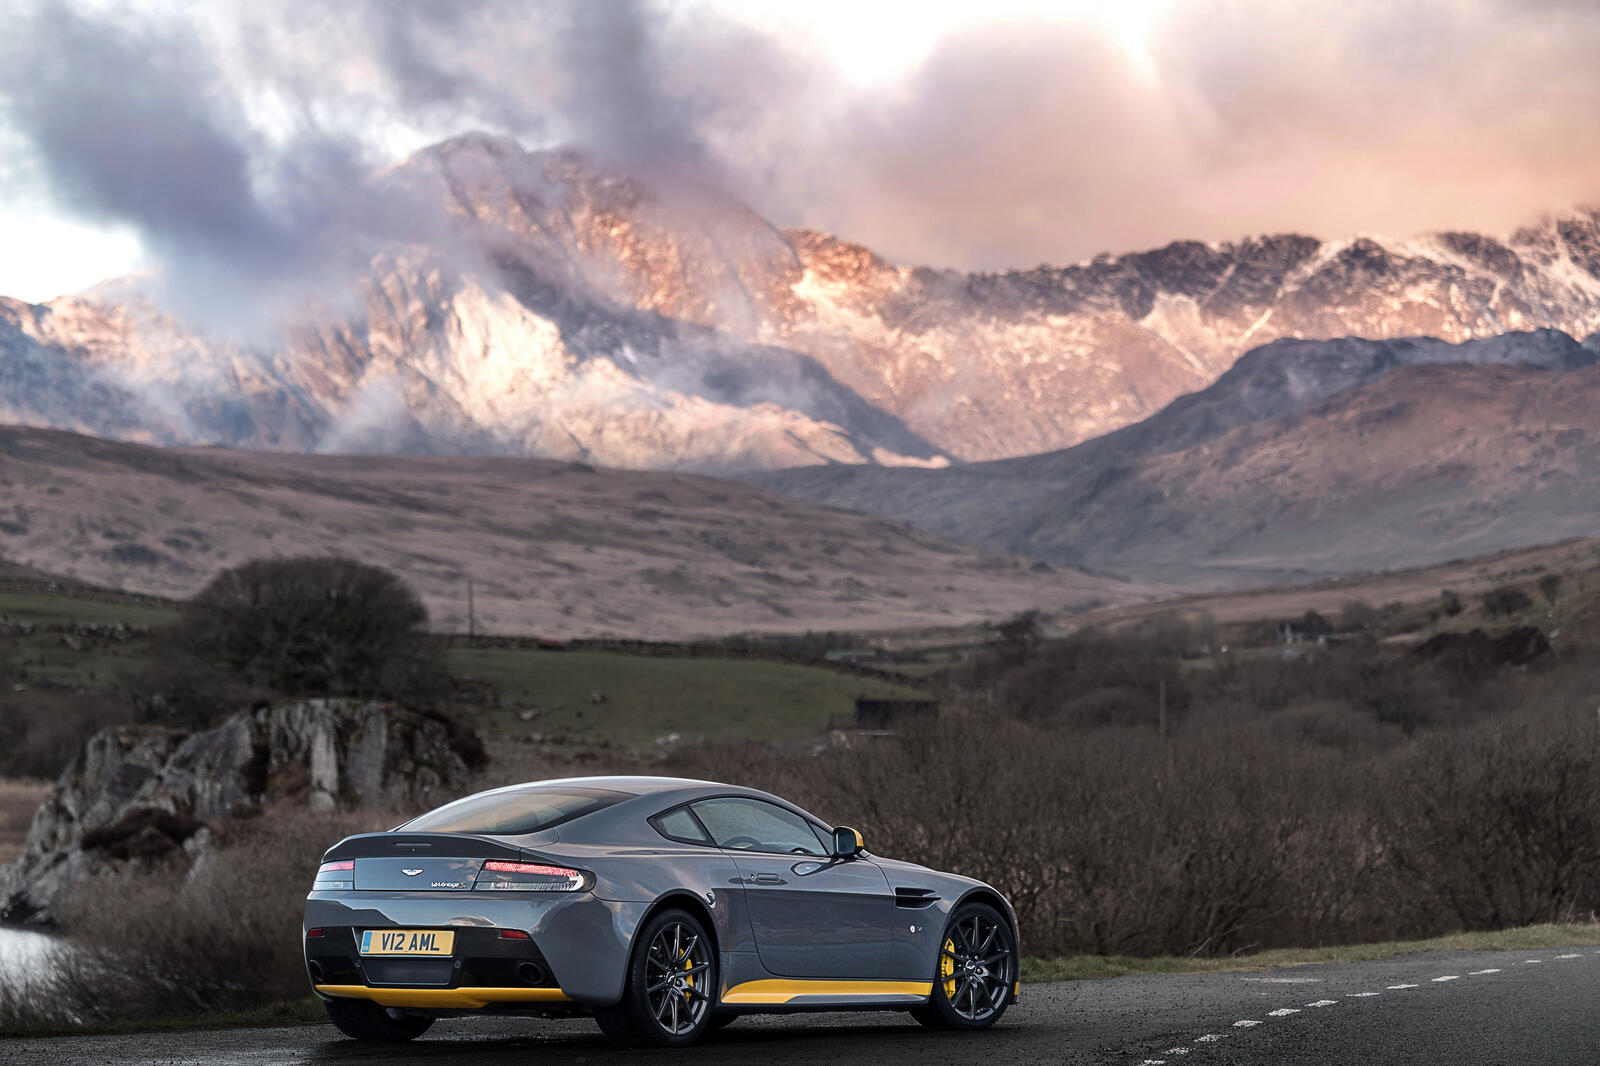 Free photo Gray Aston Martin V12 Vantage S with mountains in the background